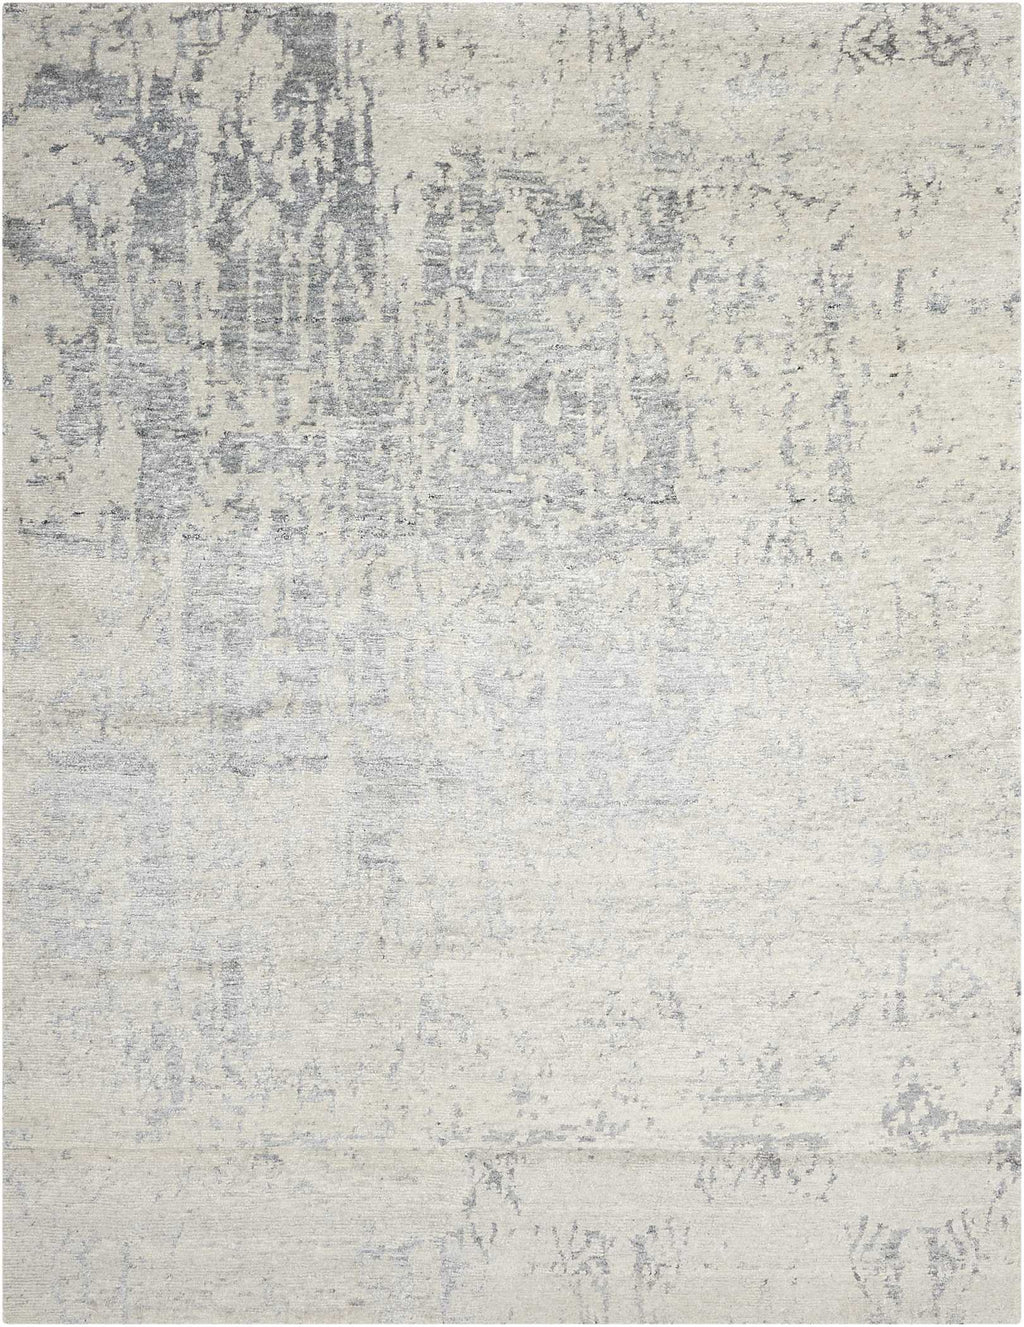 Abstract gray and white pattern, resembling a modern textured rug.